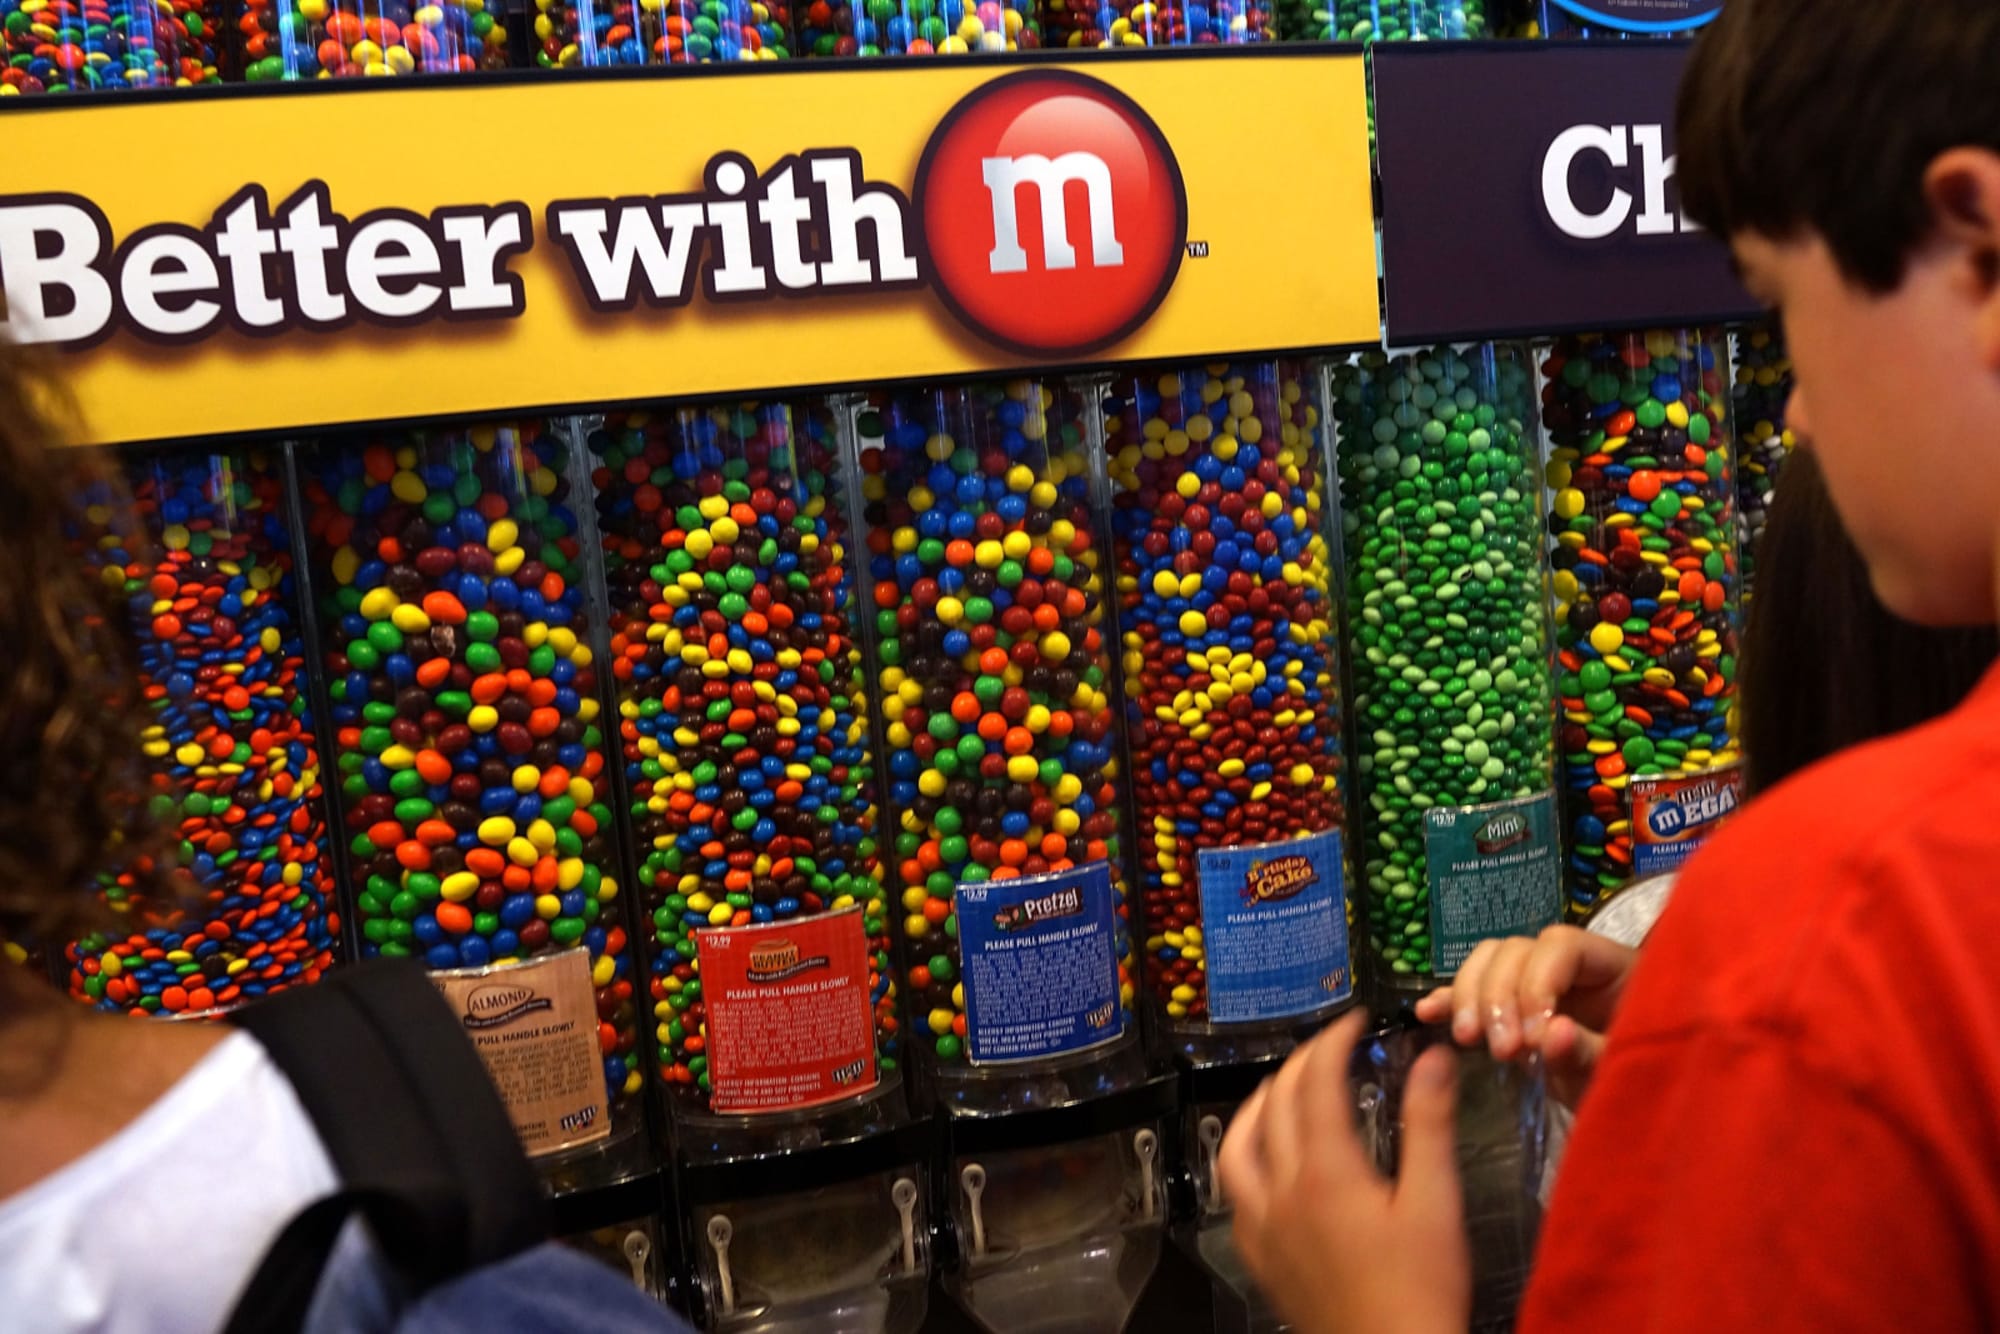 M&M's Marketing Strategy: Bringing Sweetness and Color to the World